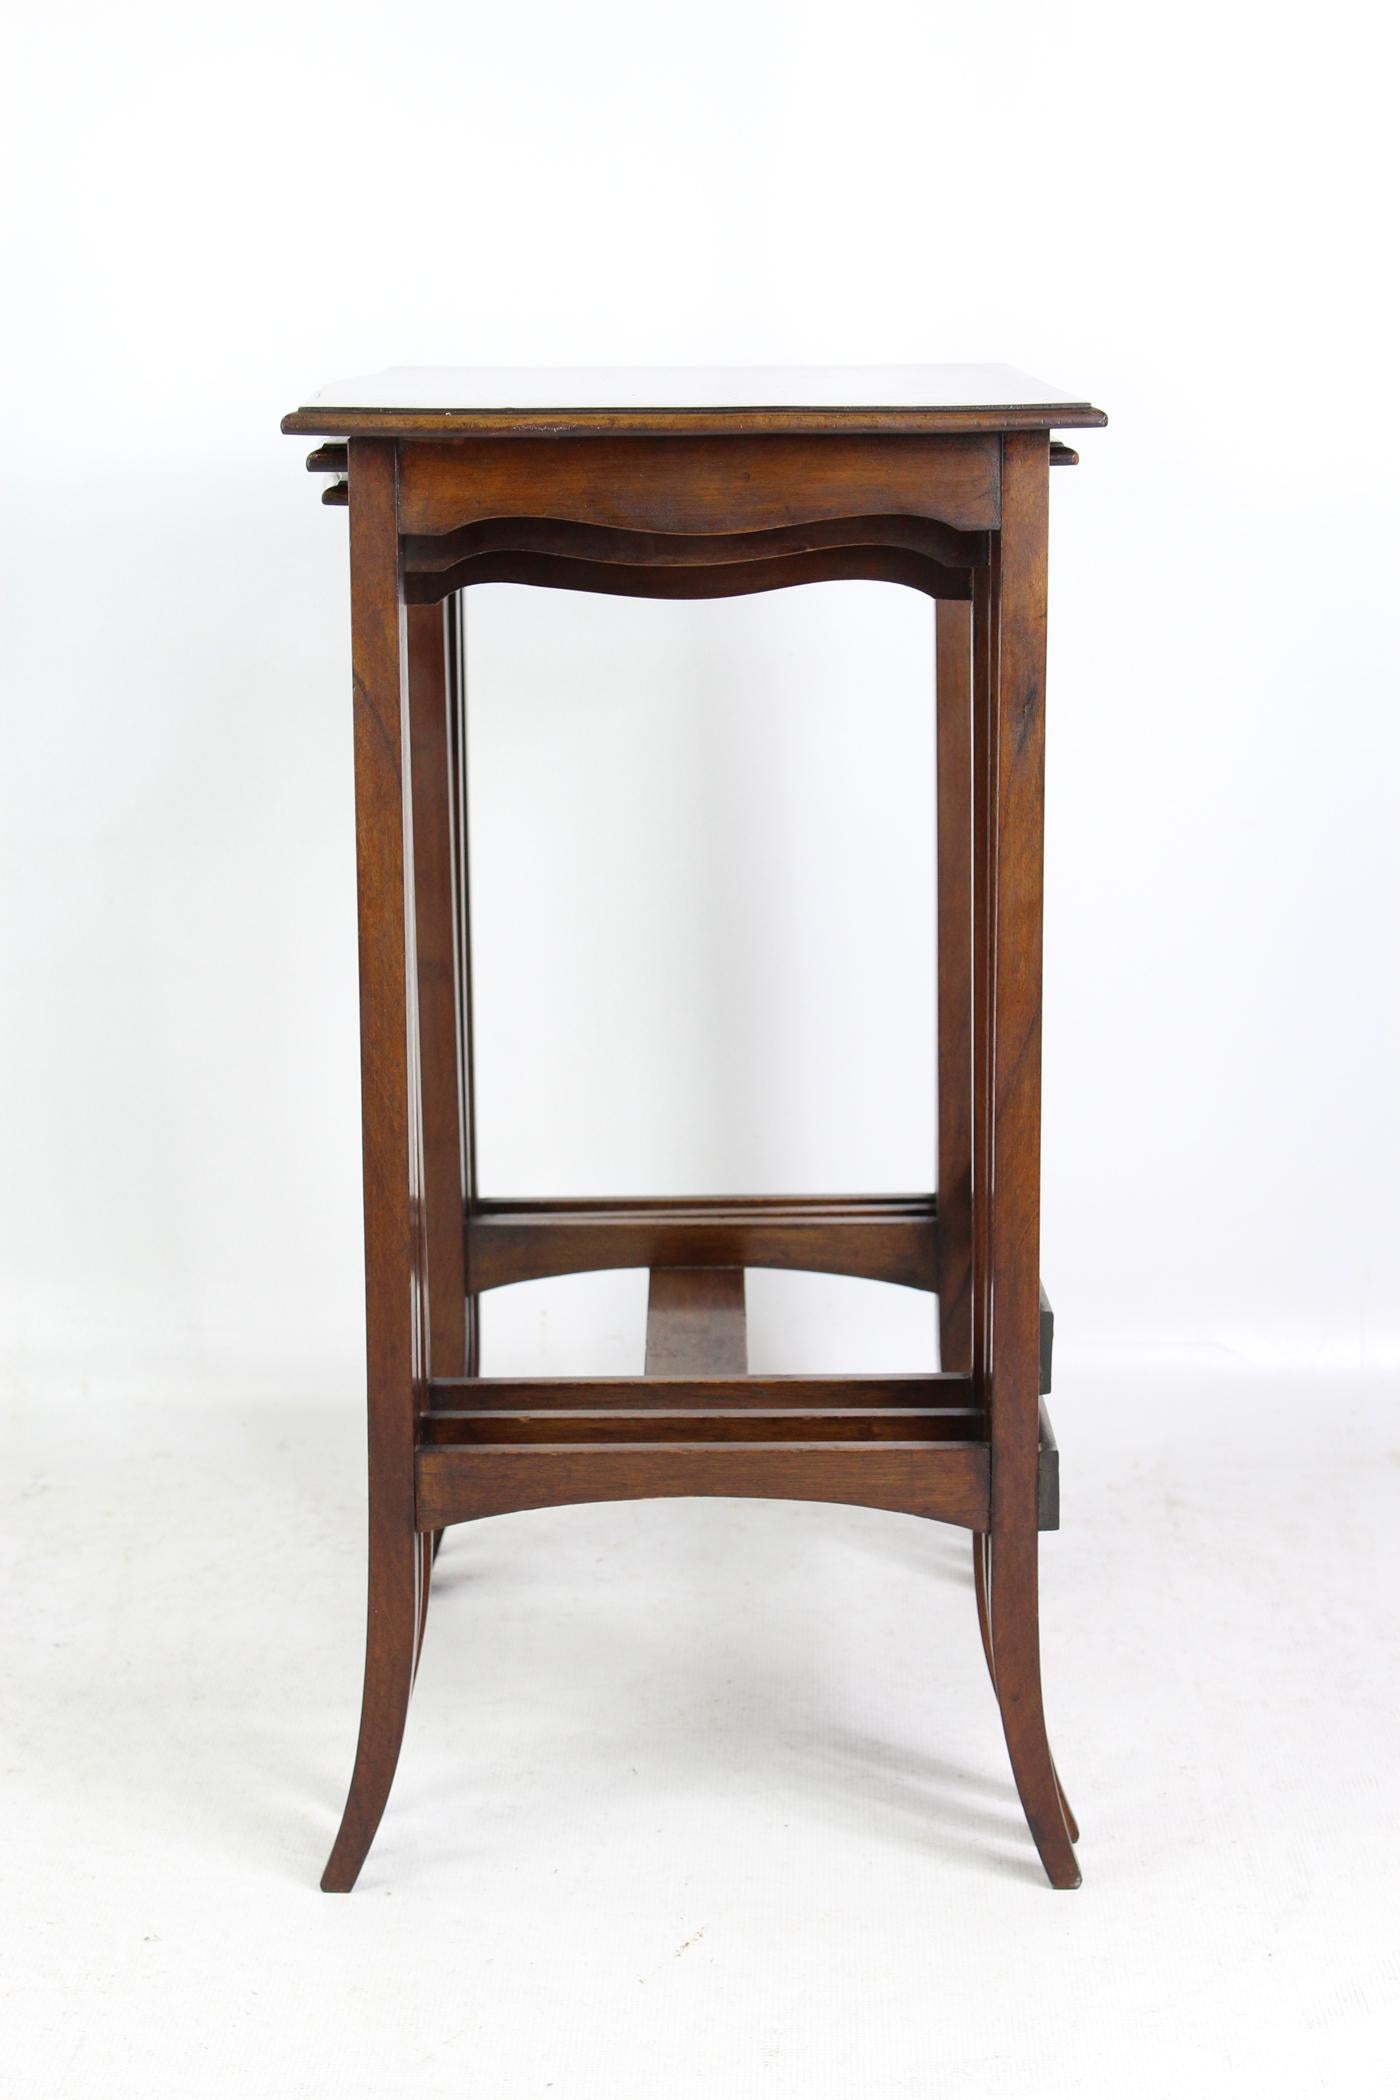 Antique Edwardian Mahogany Nest of Tables Nesting Coffee Tables English, 1910 In Good Condition For Sale In Leeds, West Yorkshire